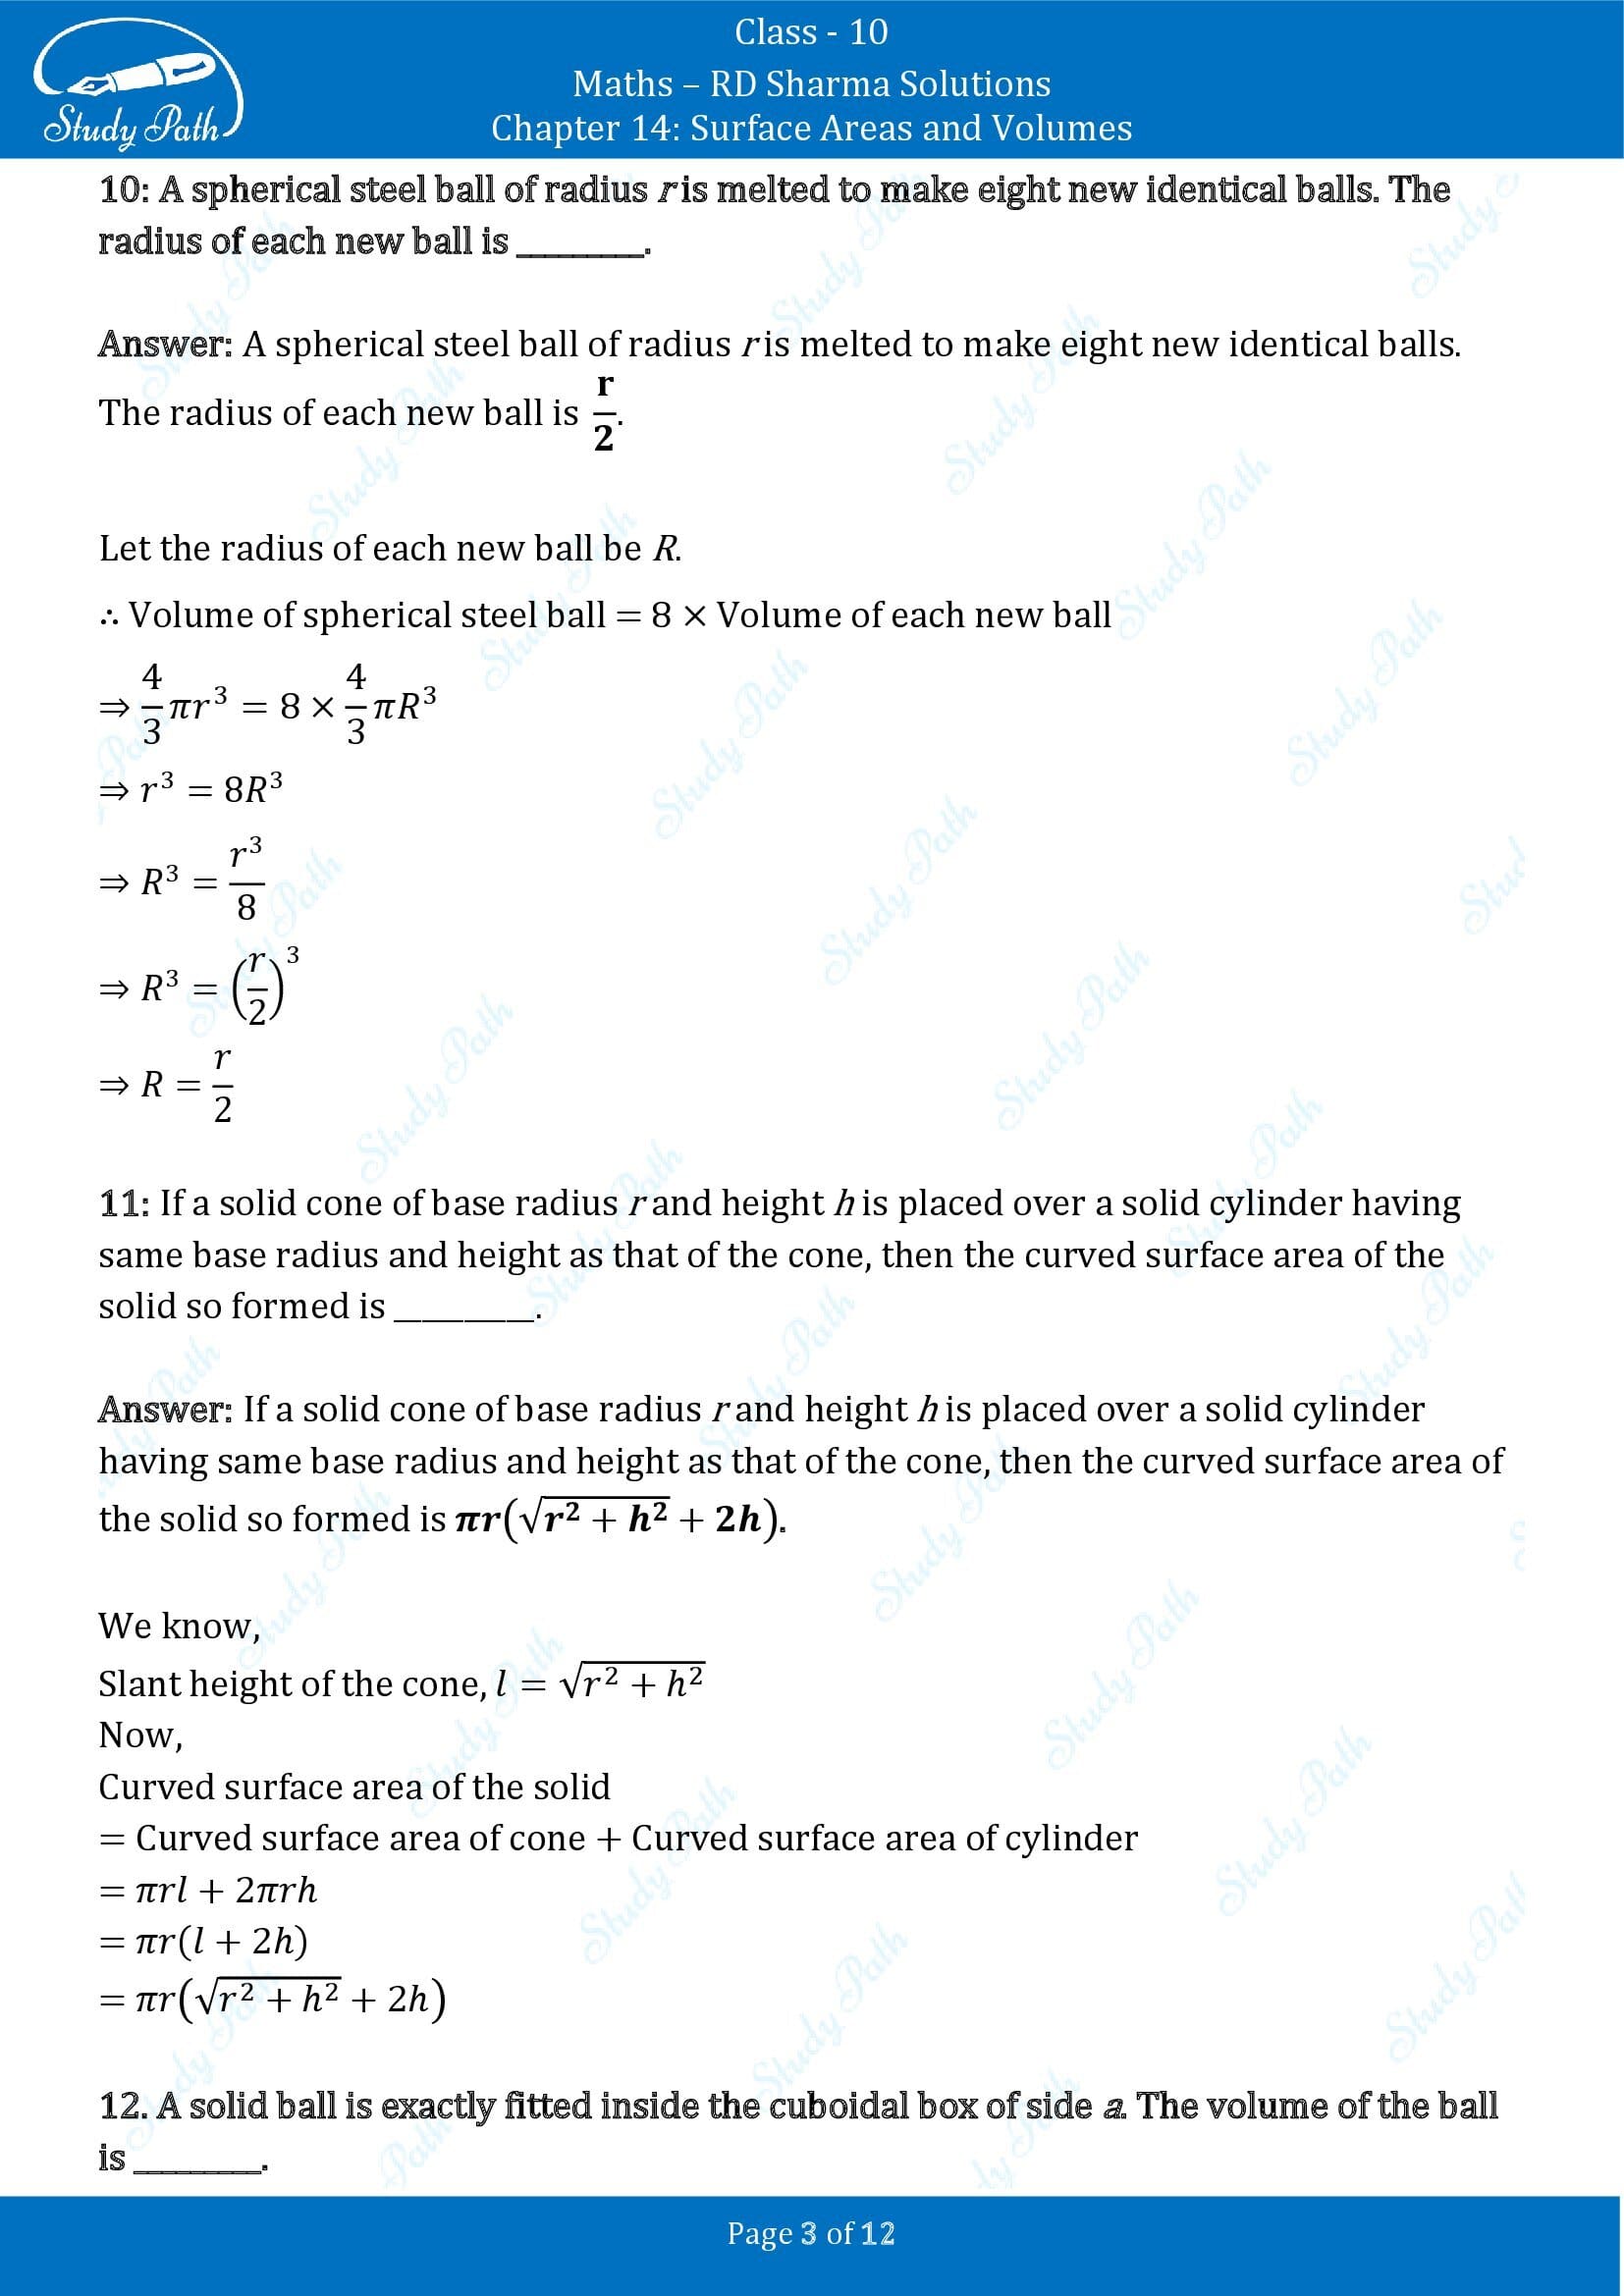 RD Sharma Solutions Class 10 Chapter 14 Surface Areas and Volumes Fill in the Blank Type Questions FBQs 00003